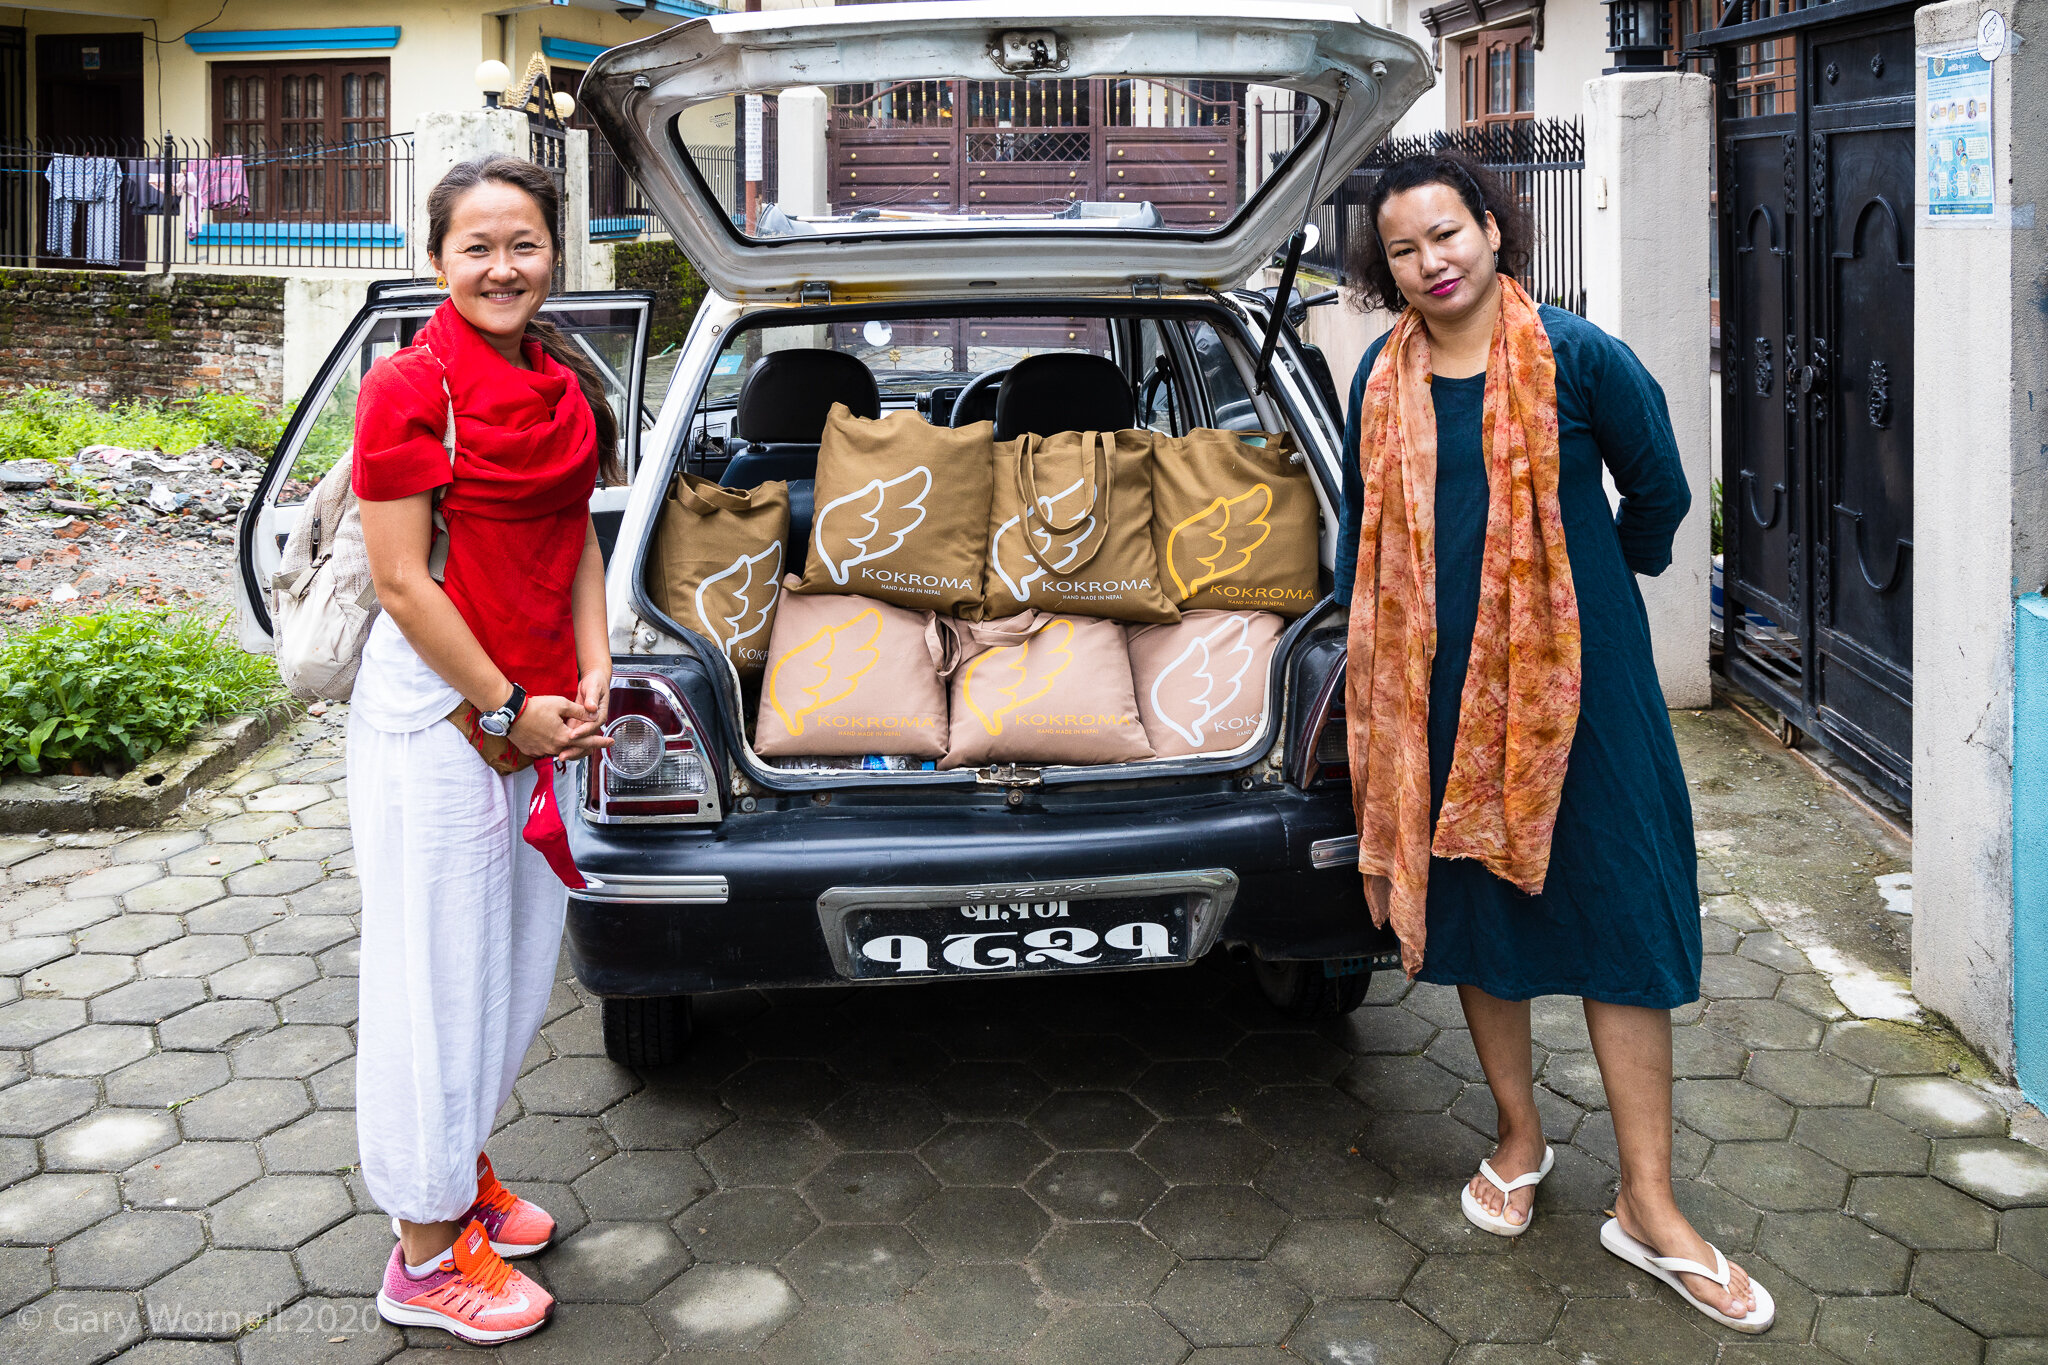  Rewati Gurung from Kokroma accompanied by volunteer Maria Bespalchinko from Russia prepare to leave for a Cradle Care donation. 